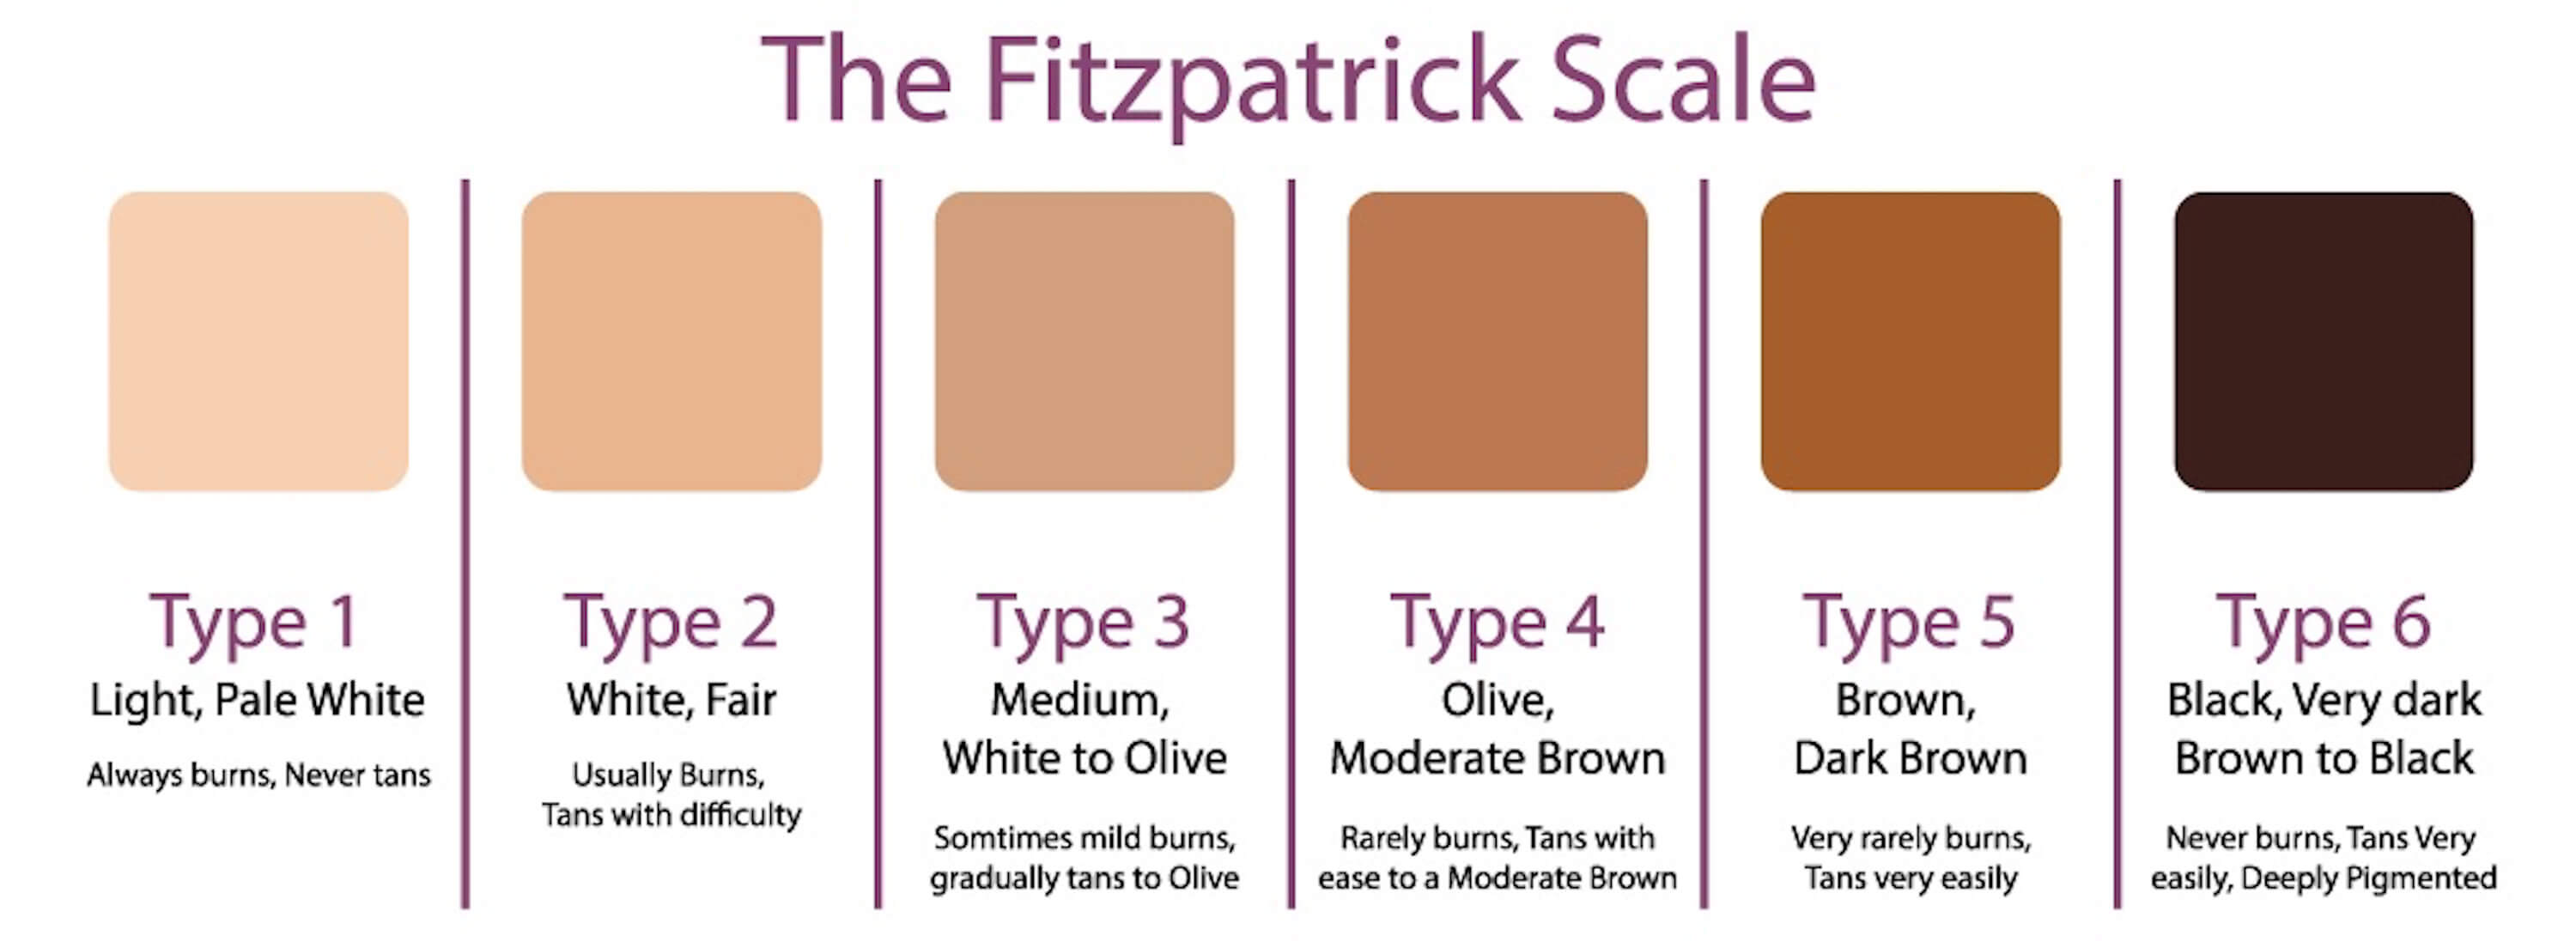 fitzpatrick scale of skin types